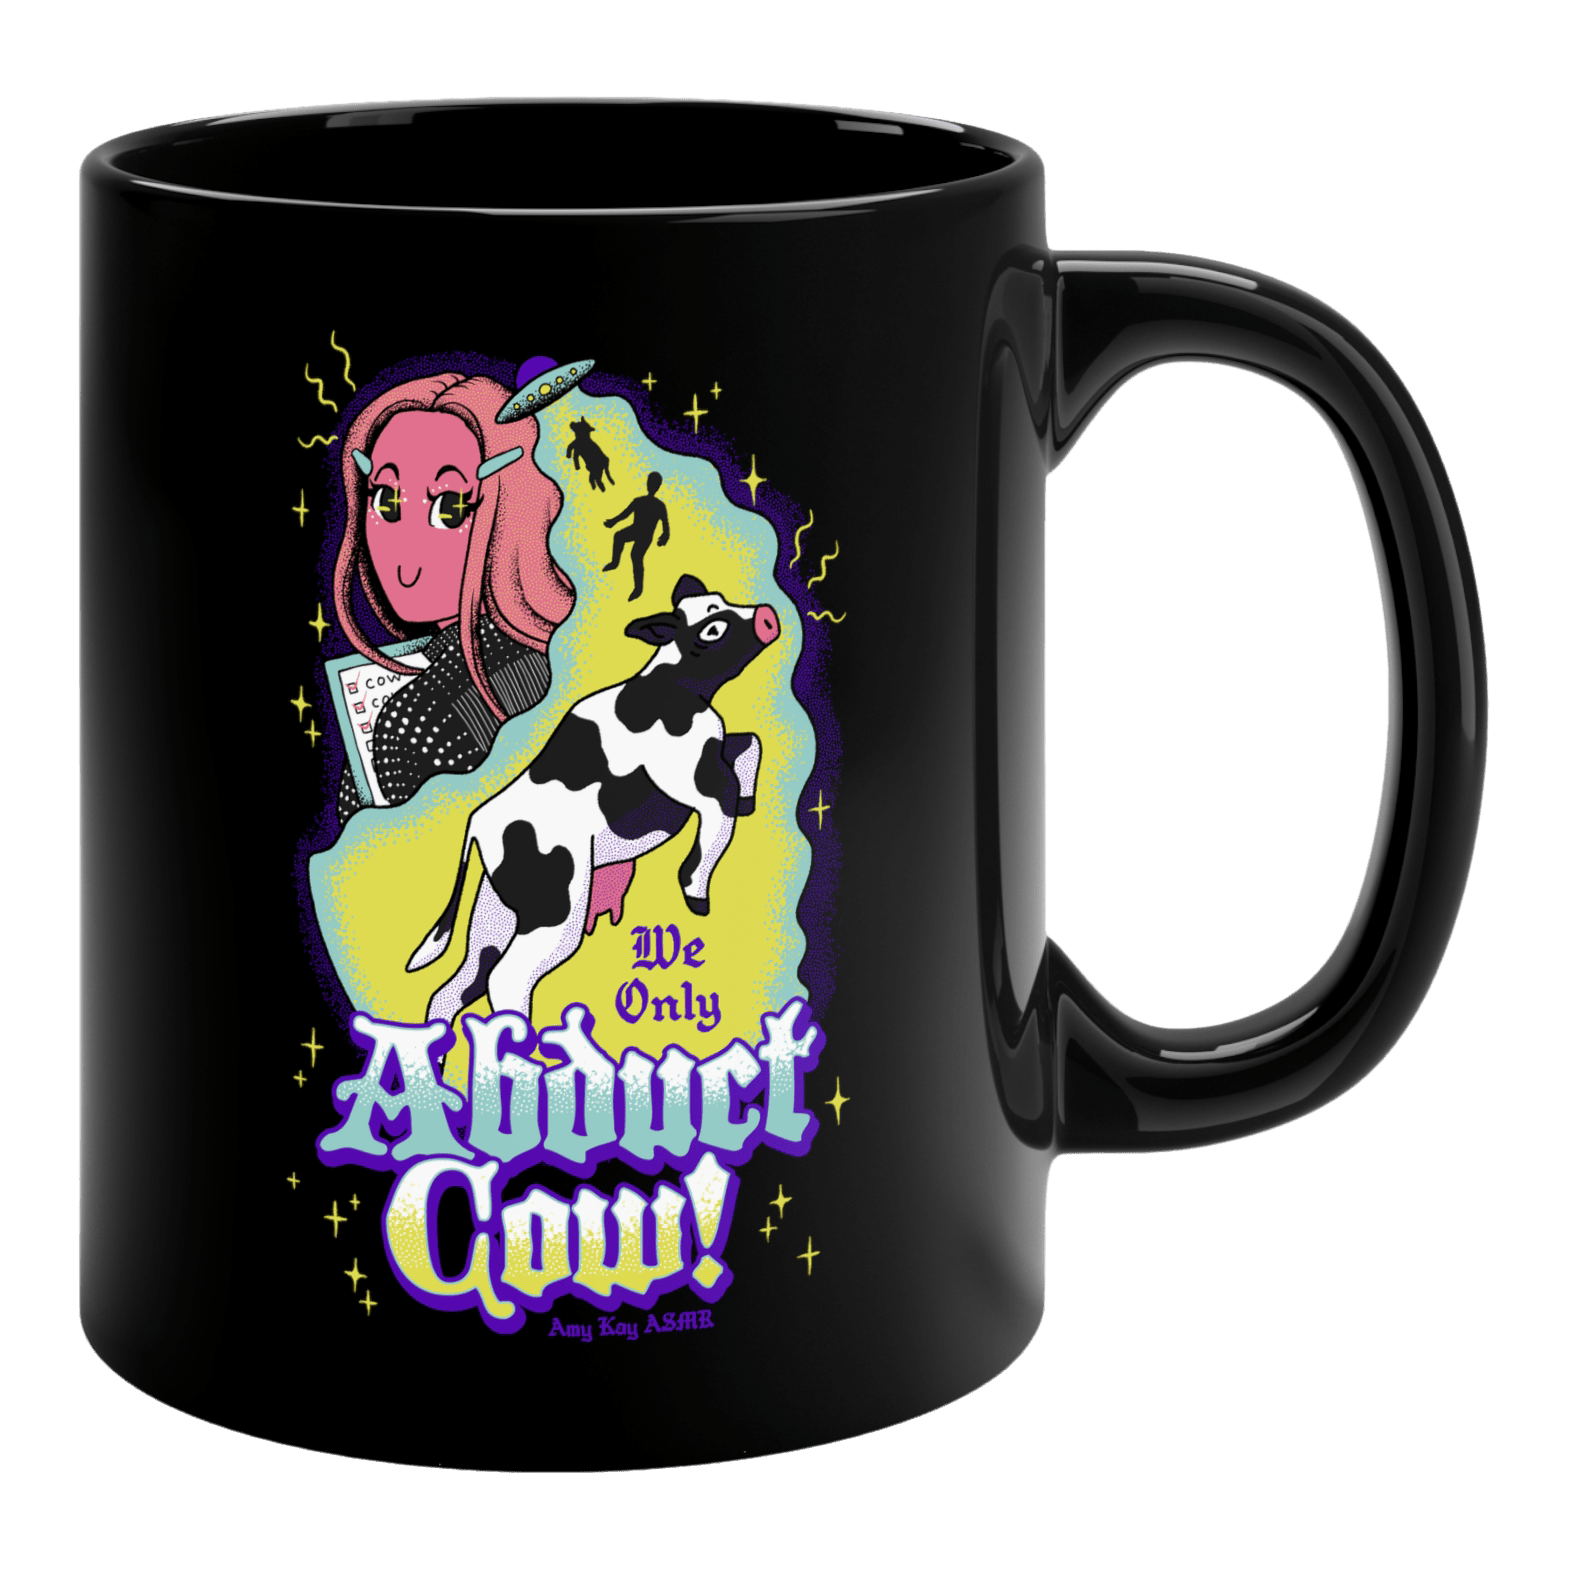 We Only Abduct Cow Mug